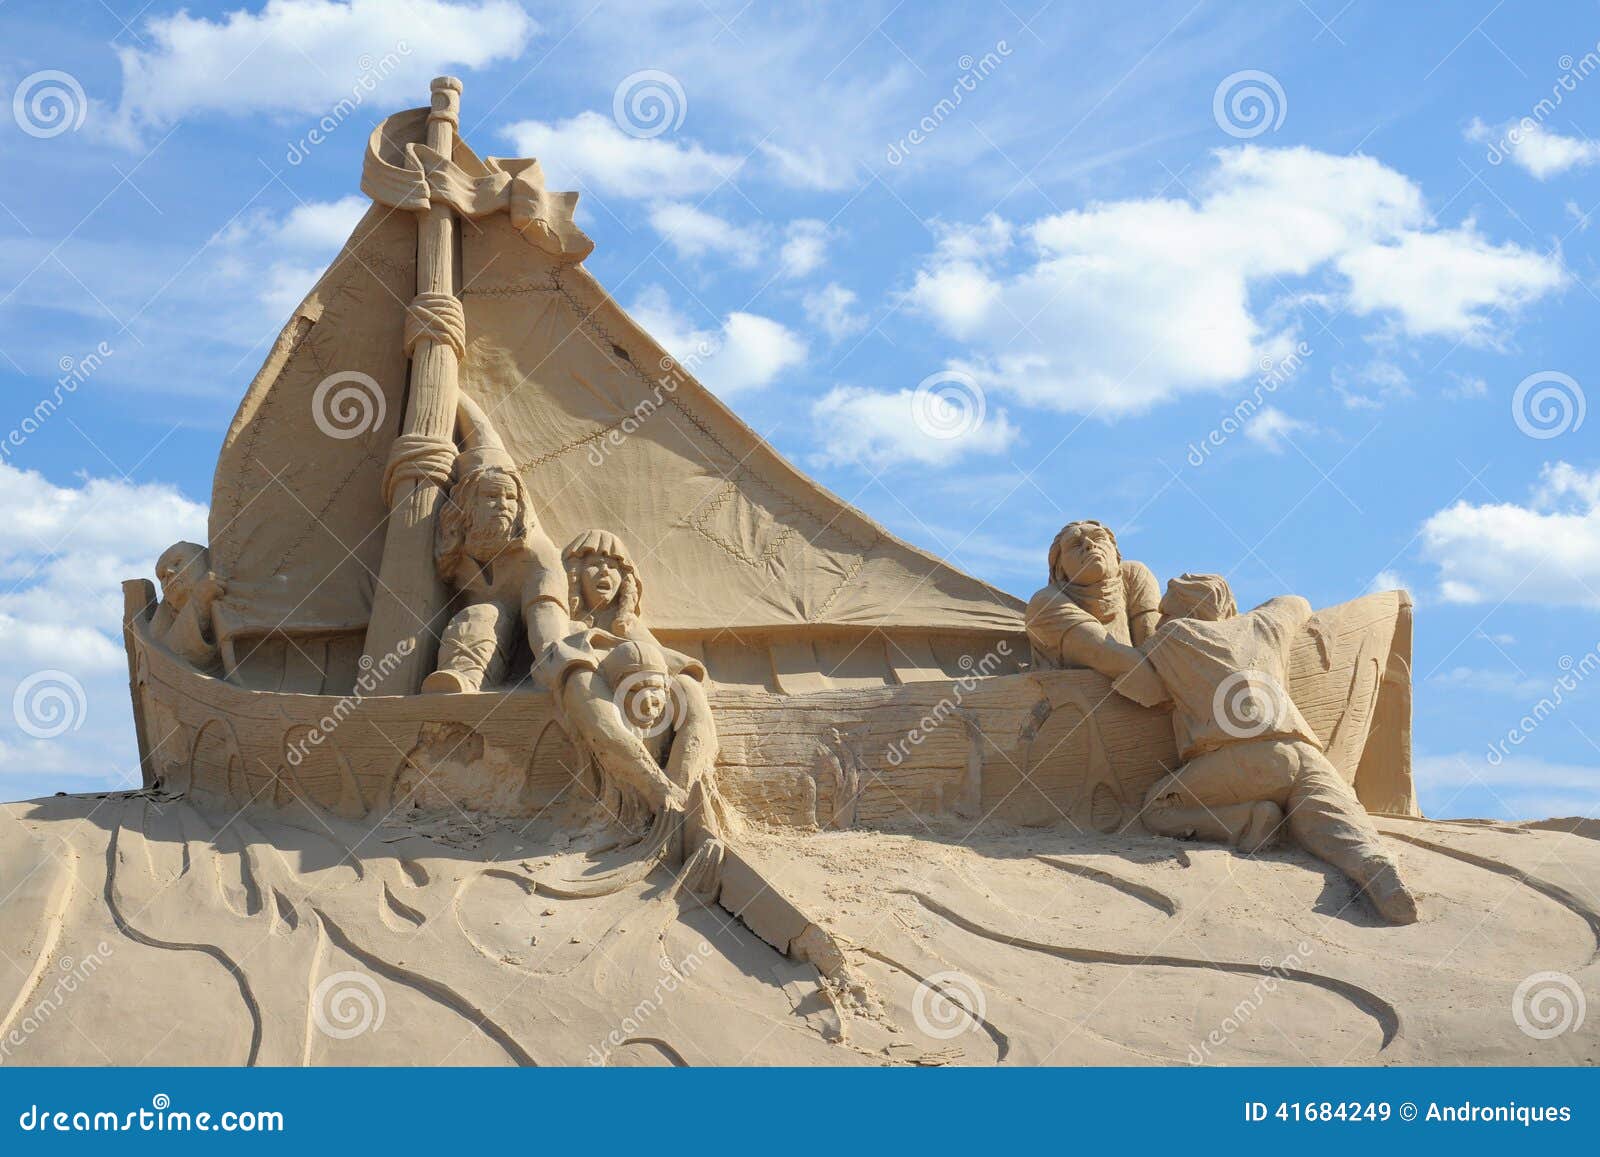 Sand Sculpture: Saving People in Sail Boat Editorial Stock Image ...